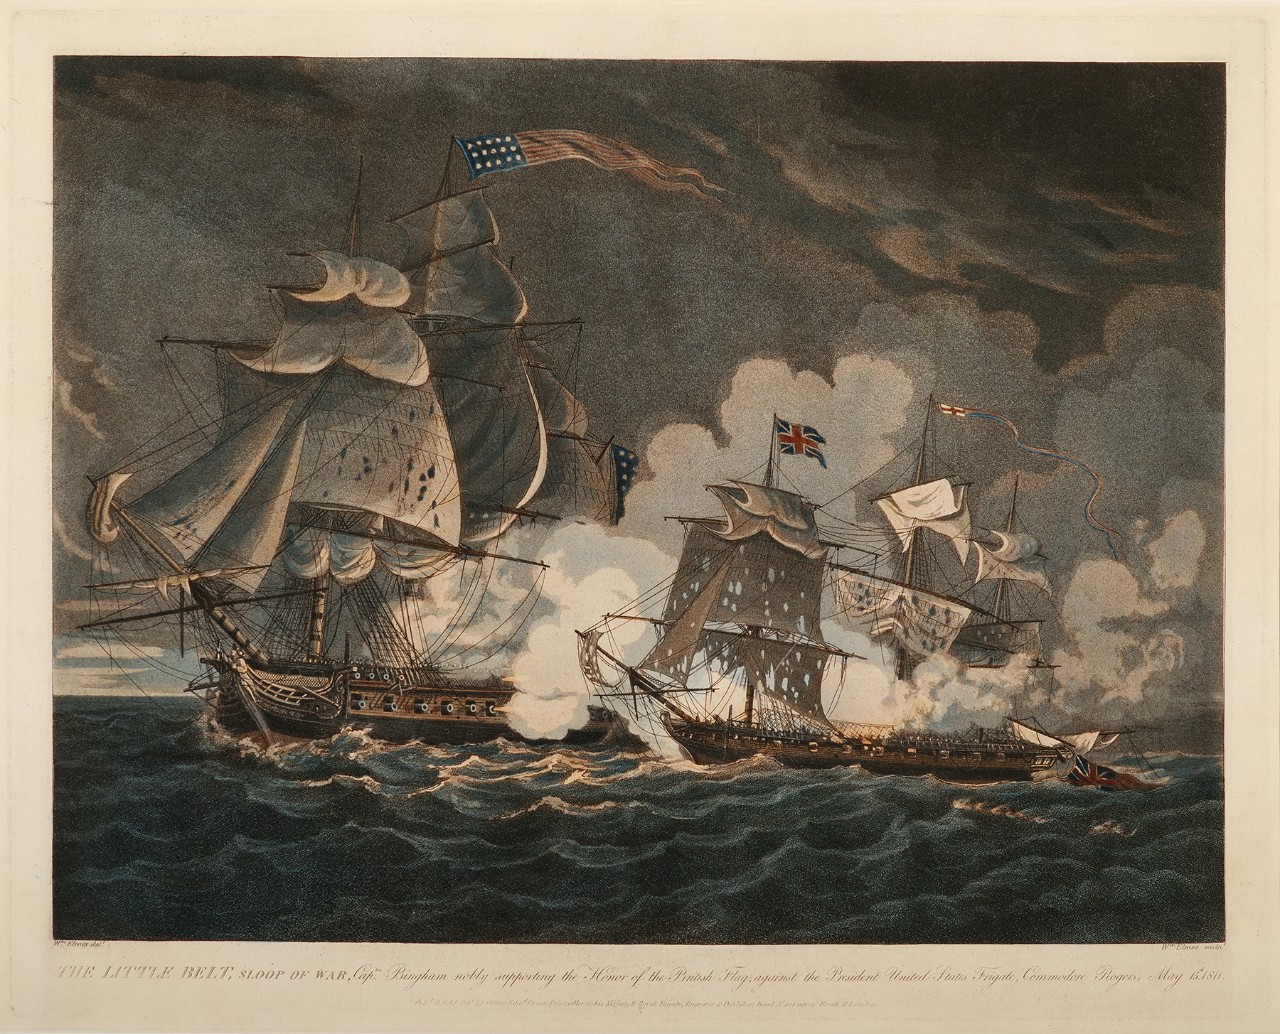 With a dark background, two ships firing at one other. The larger American ship is on the left the British ship is on the right